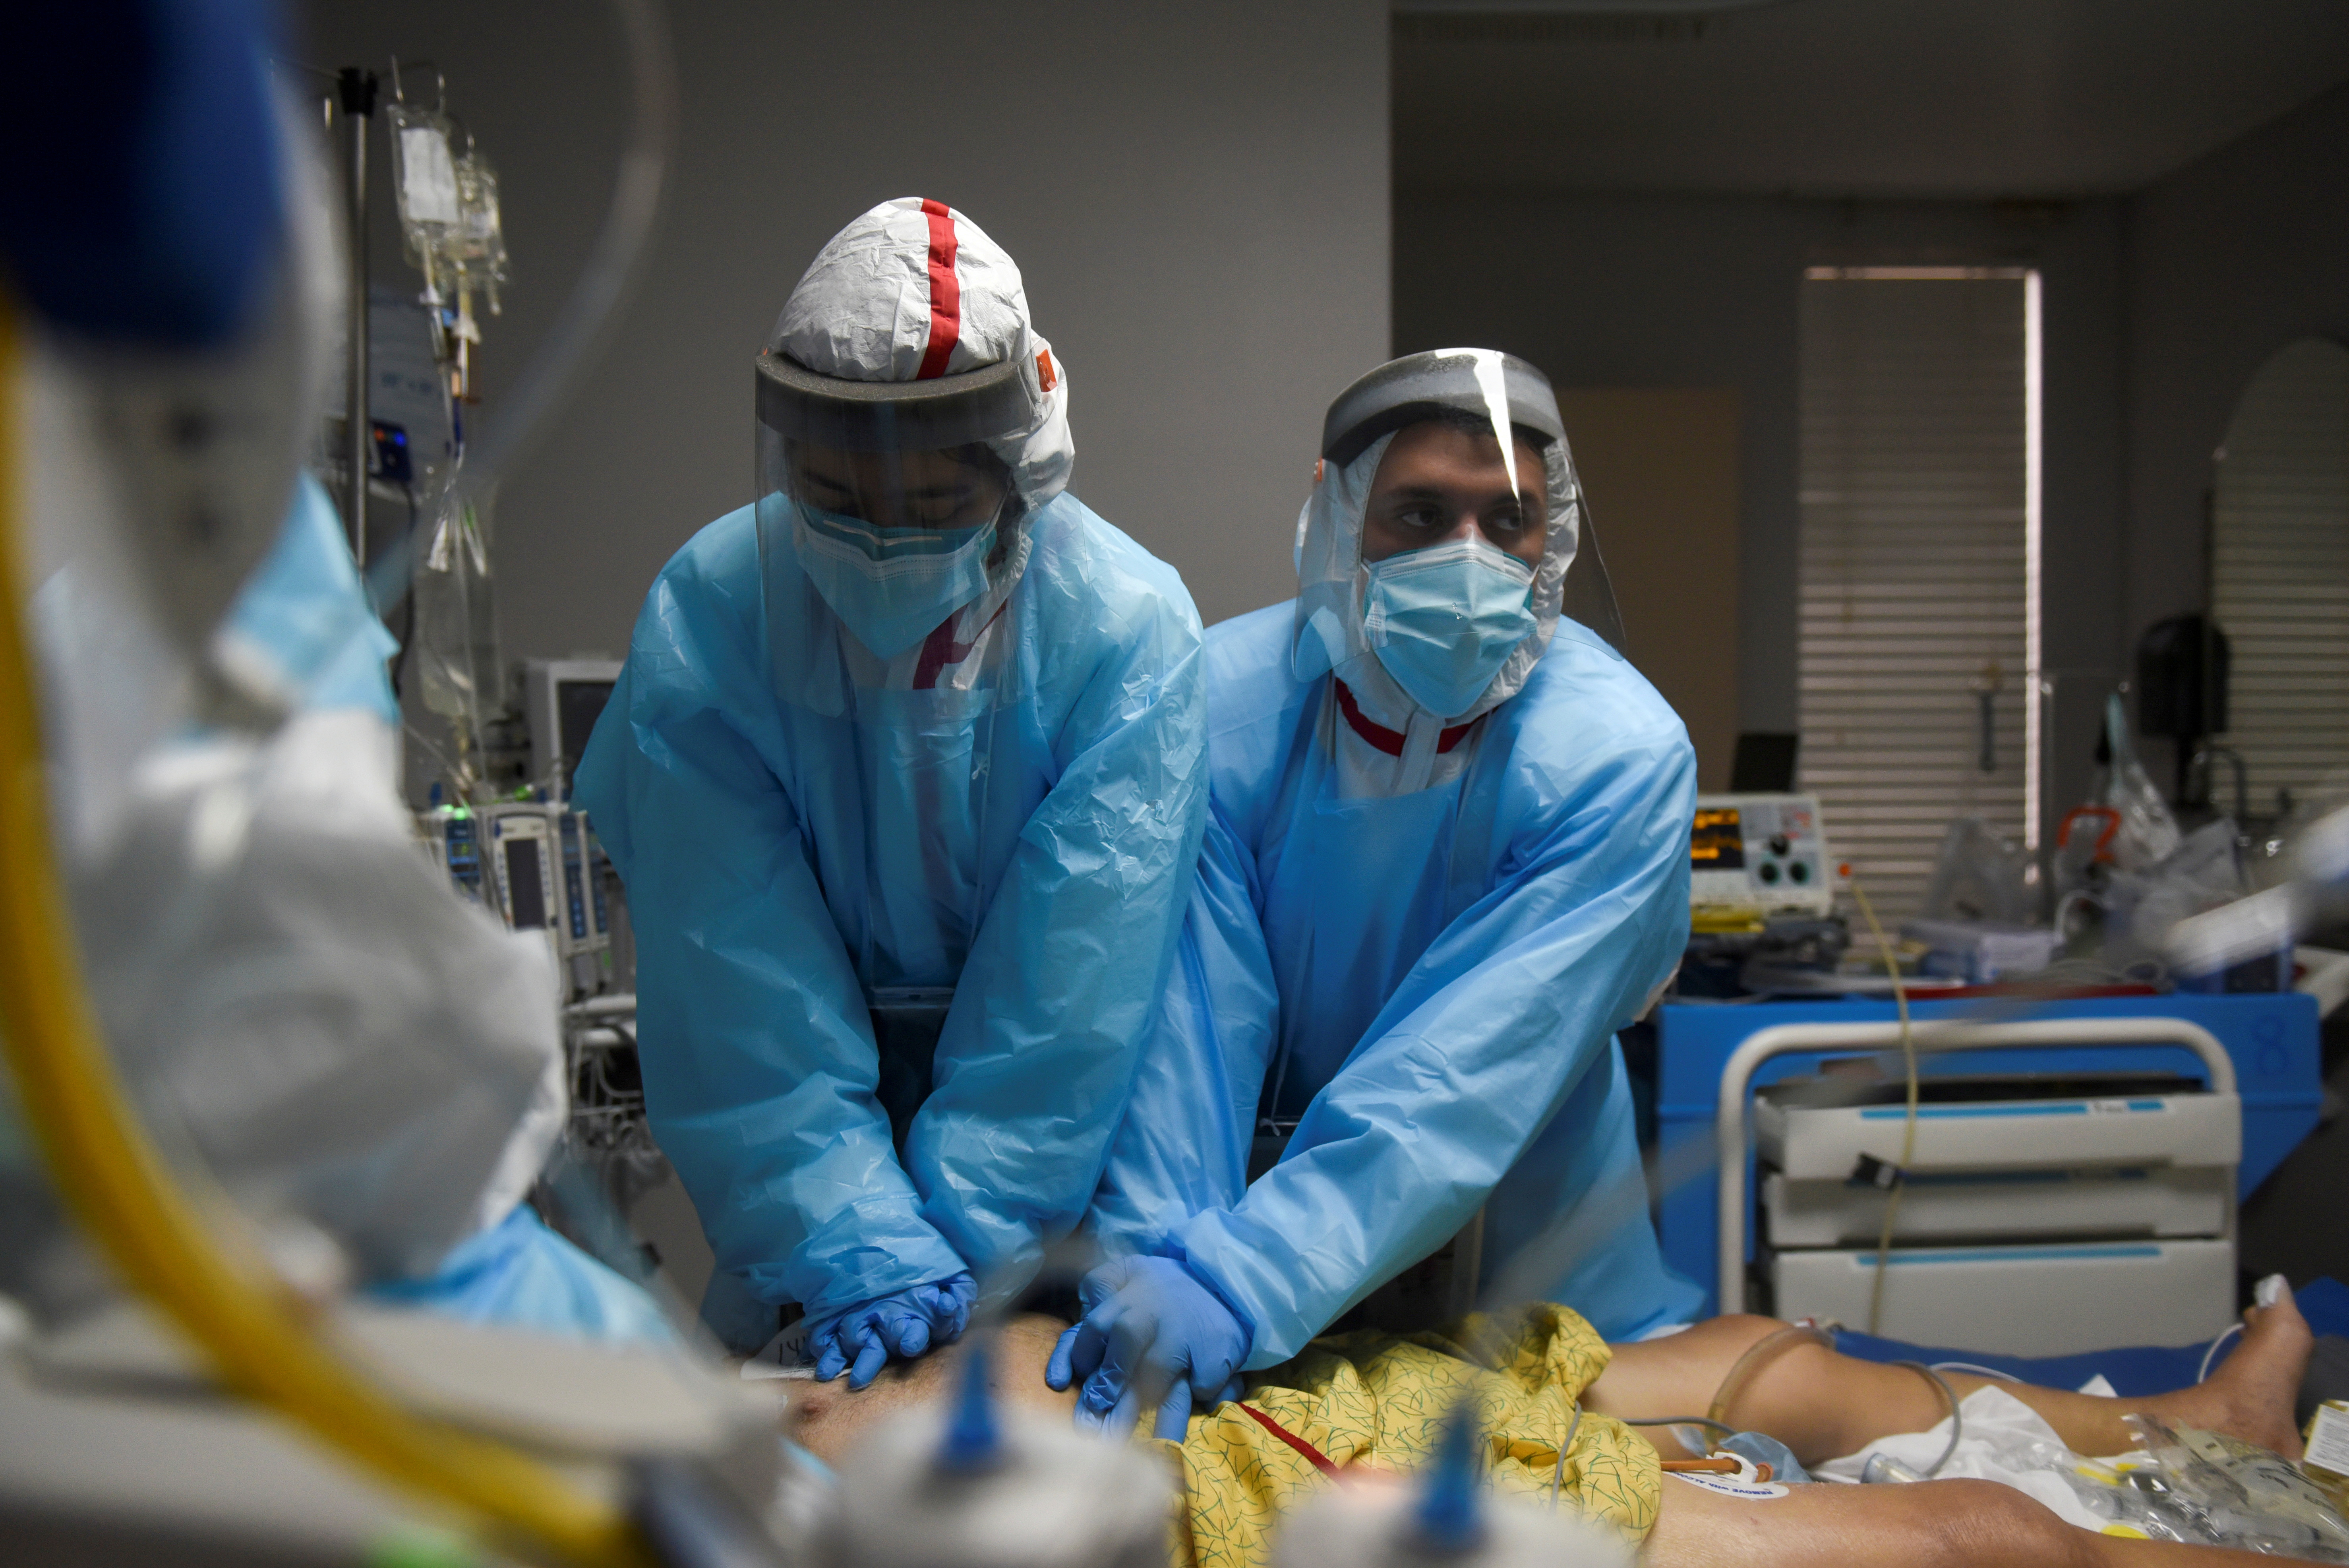 Healthcare personnel work inside a COVID-19 unit in Houston